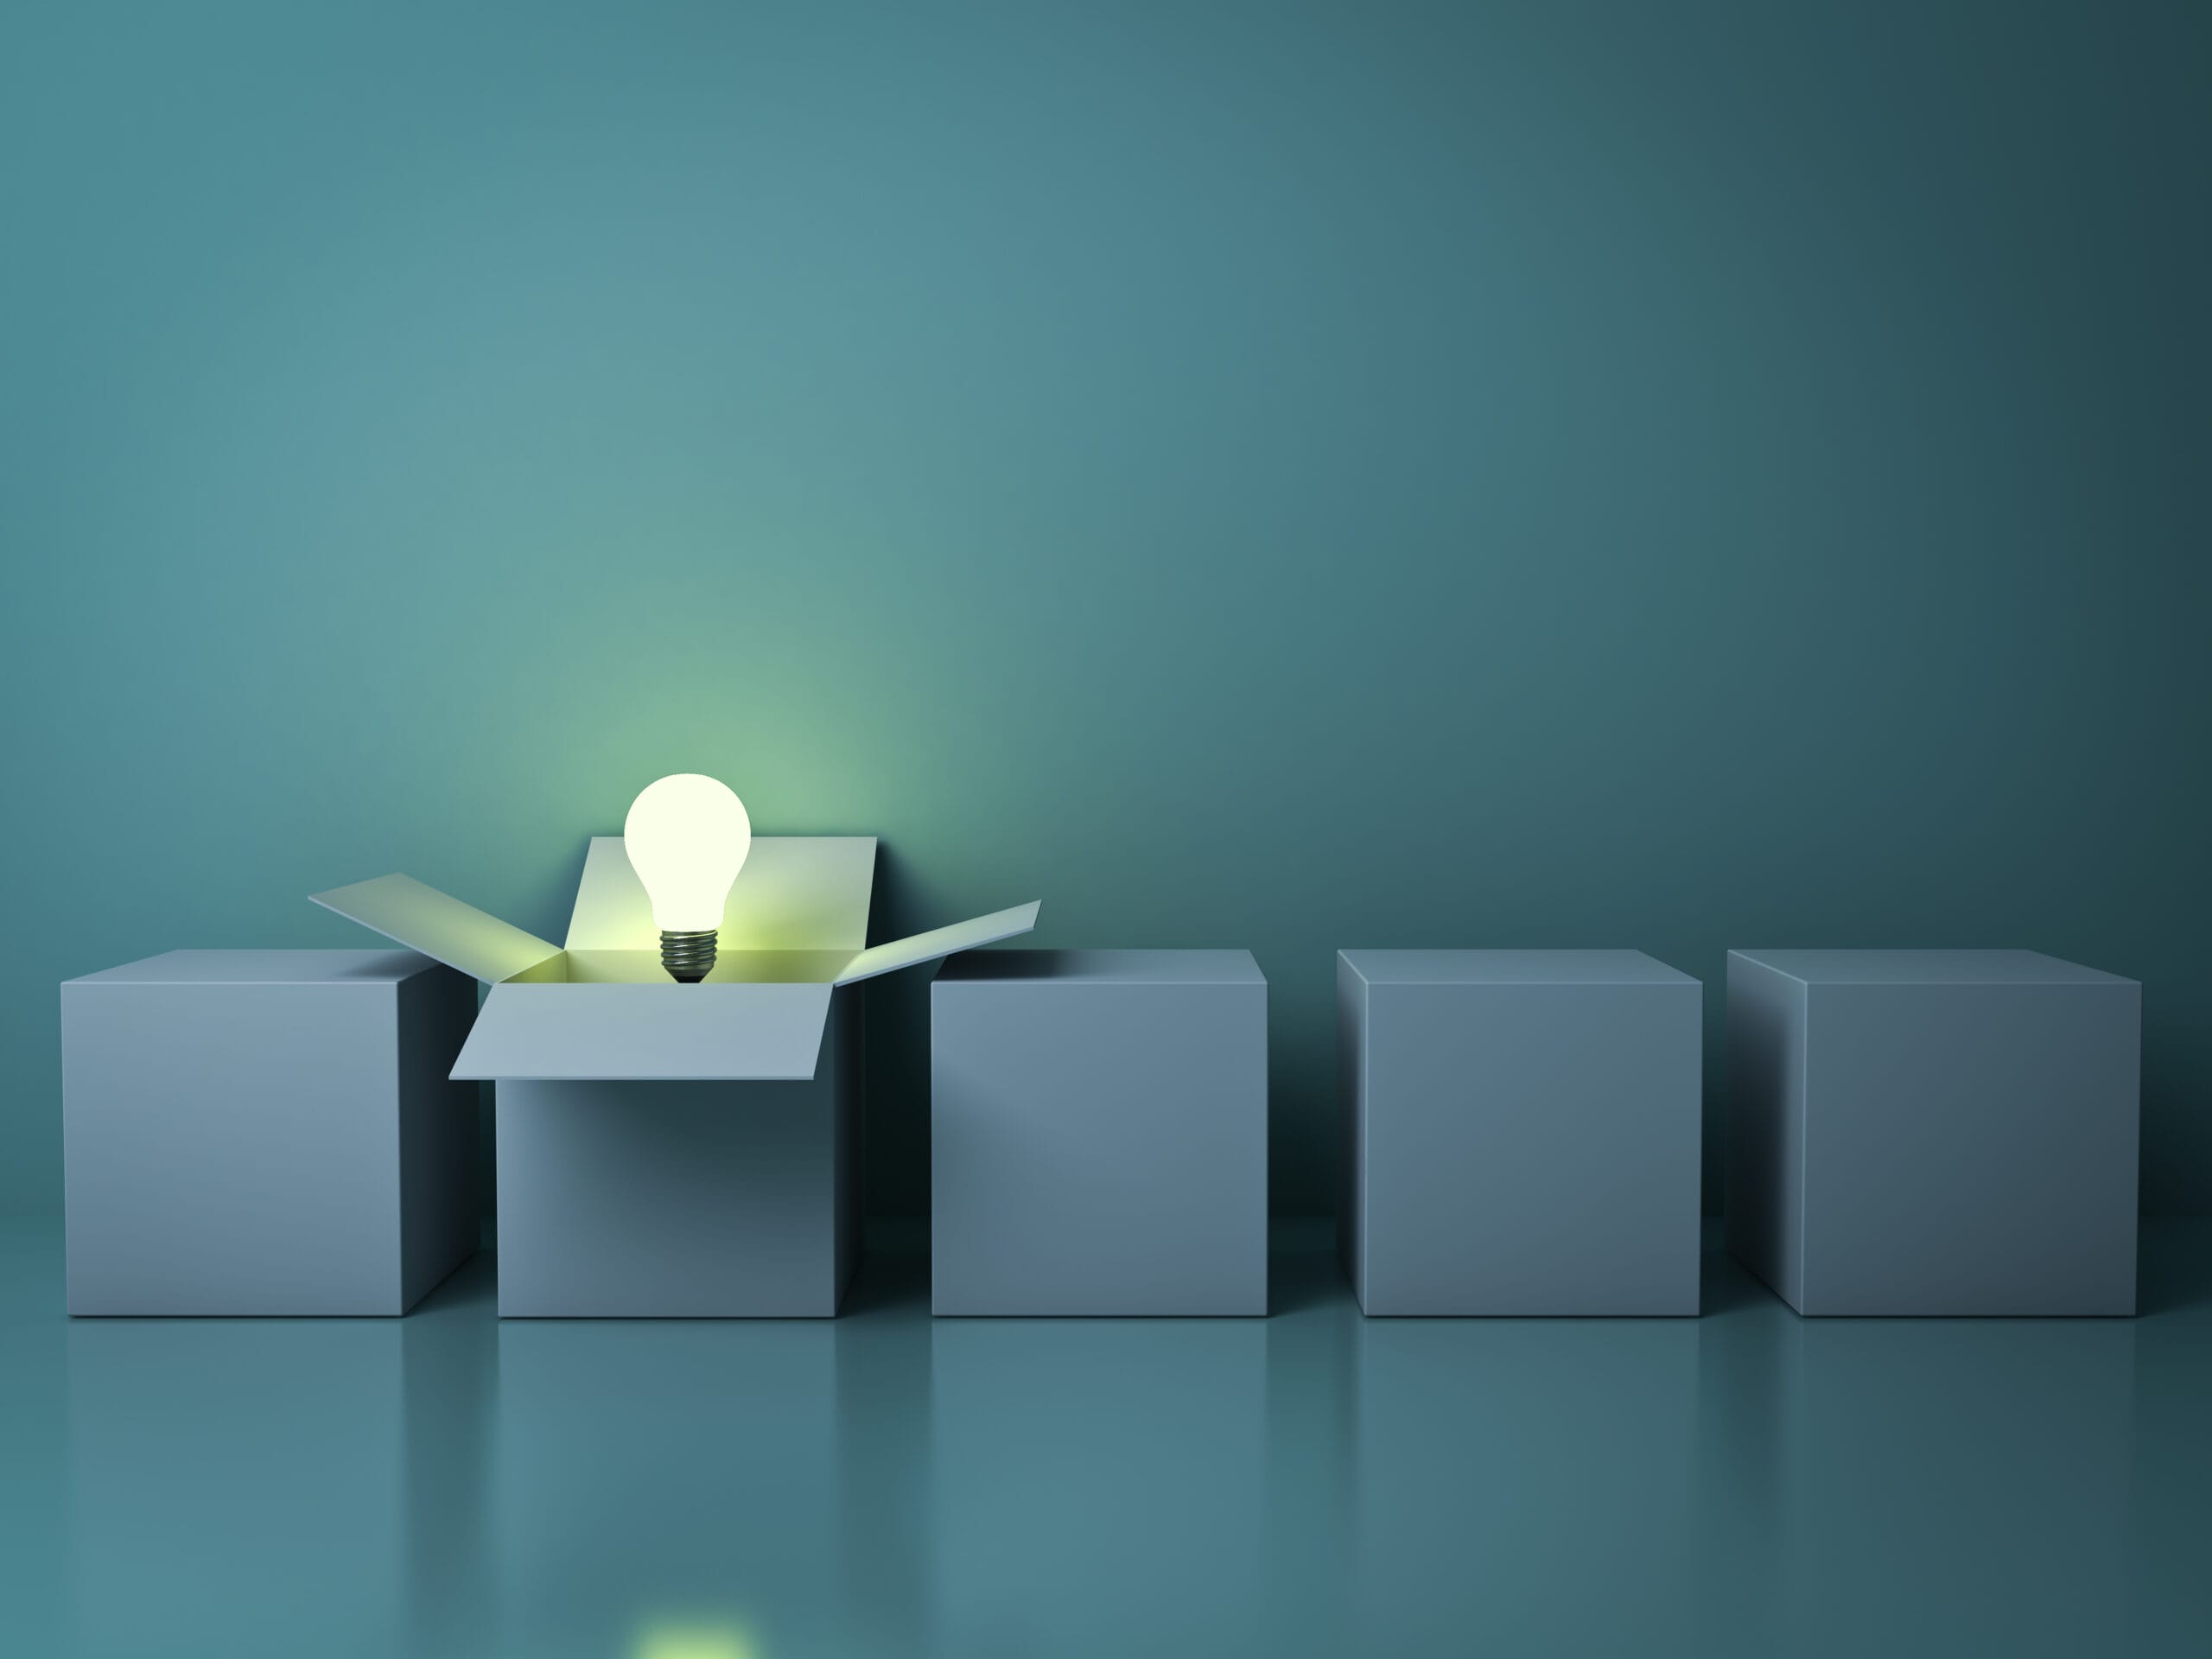 Stand out from the crowd different creative idea concepts , One white opened box with idea light bulb glowing among close square boxes on green background in the row with reflections . 3D render